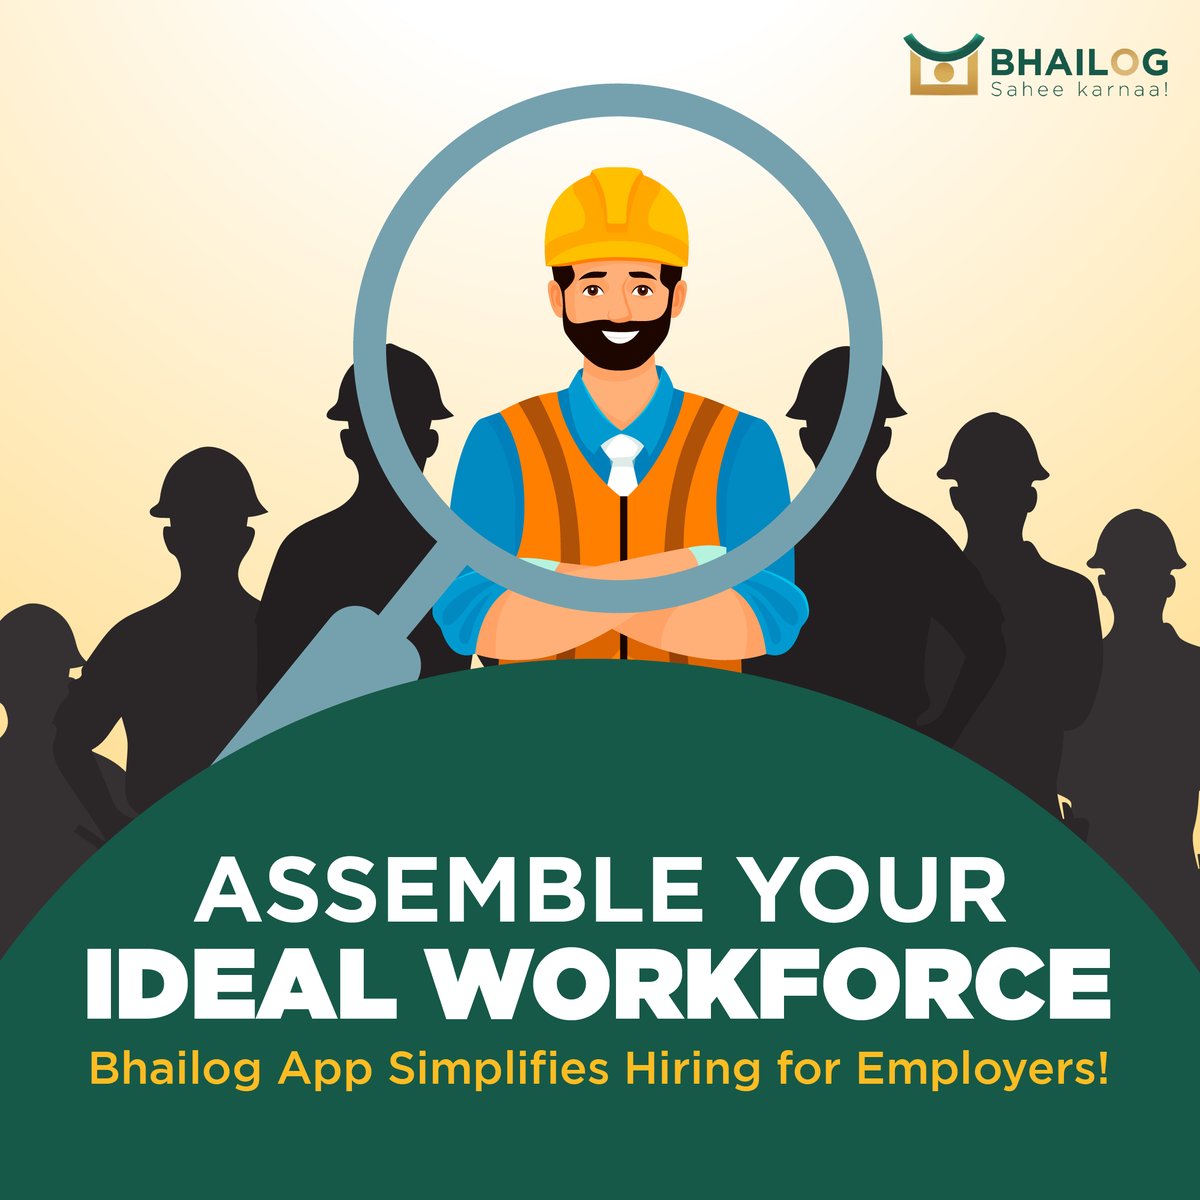 Connect seamlessly with top talent and find your dream team effortlessly. Say goodbye to hiring hassles and hello to success!Transform your hiring process with Bhailog App.
.
.
.
.
 #SeamlessConnection #EffortlessHiring #BhailogApp #Recruitment #HiringProcess #bhailogapp